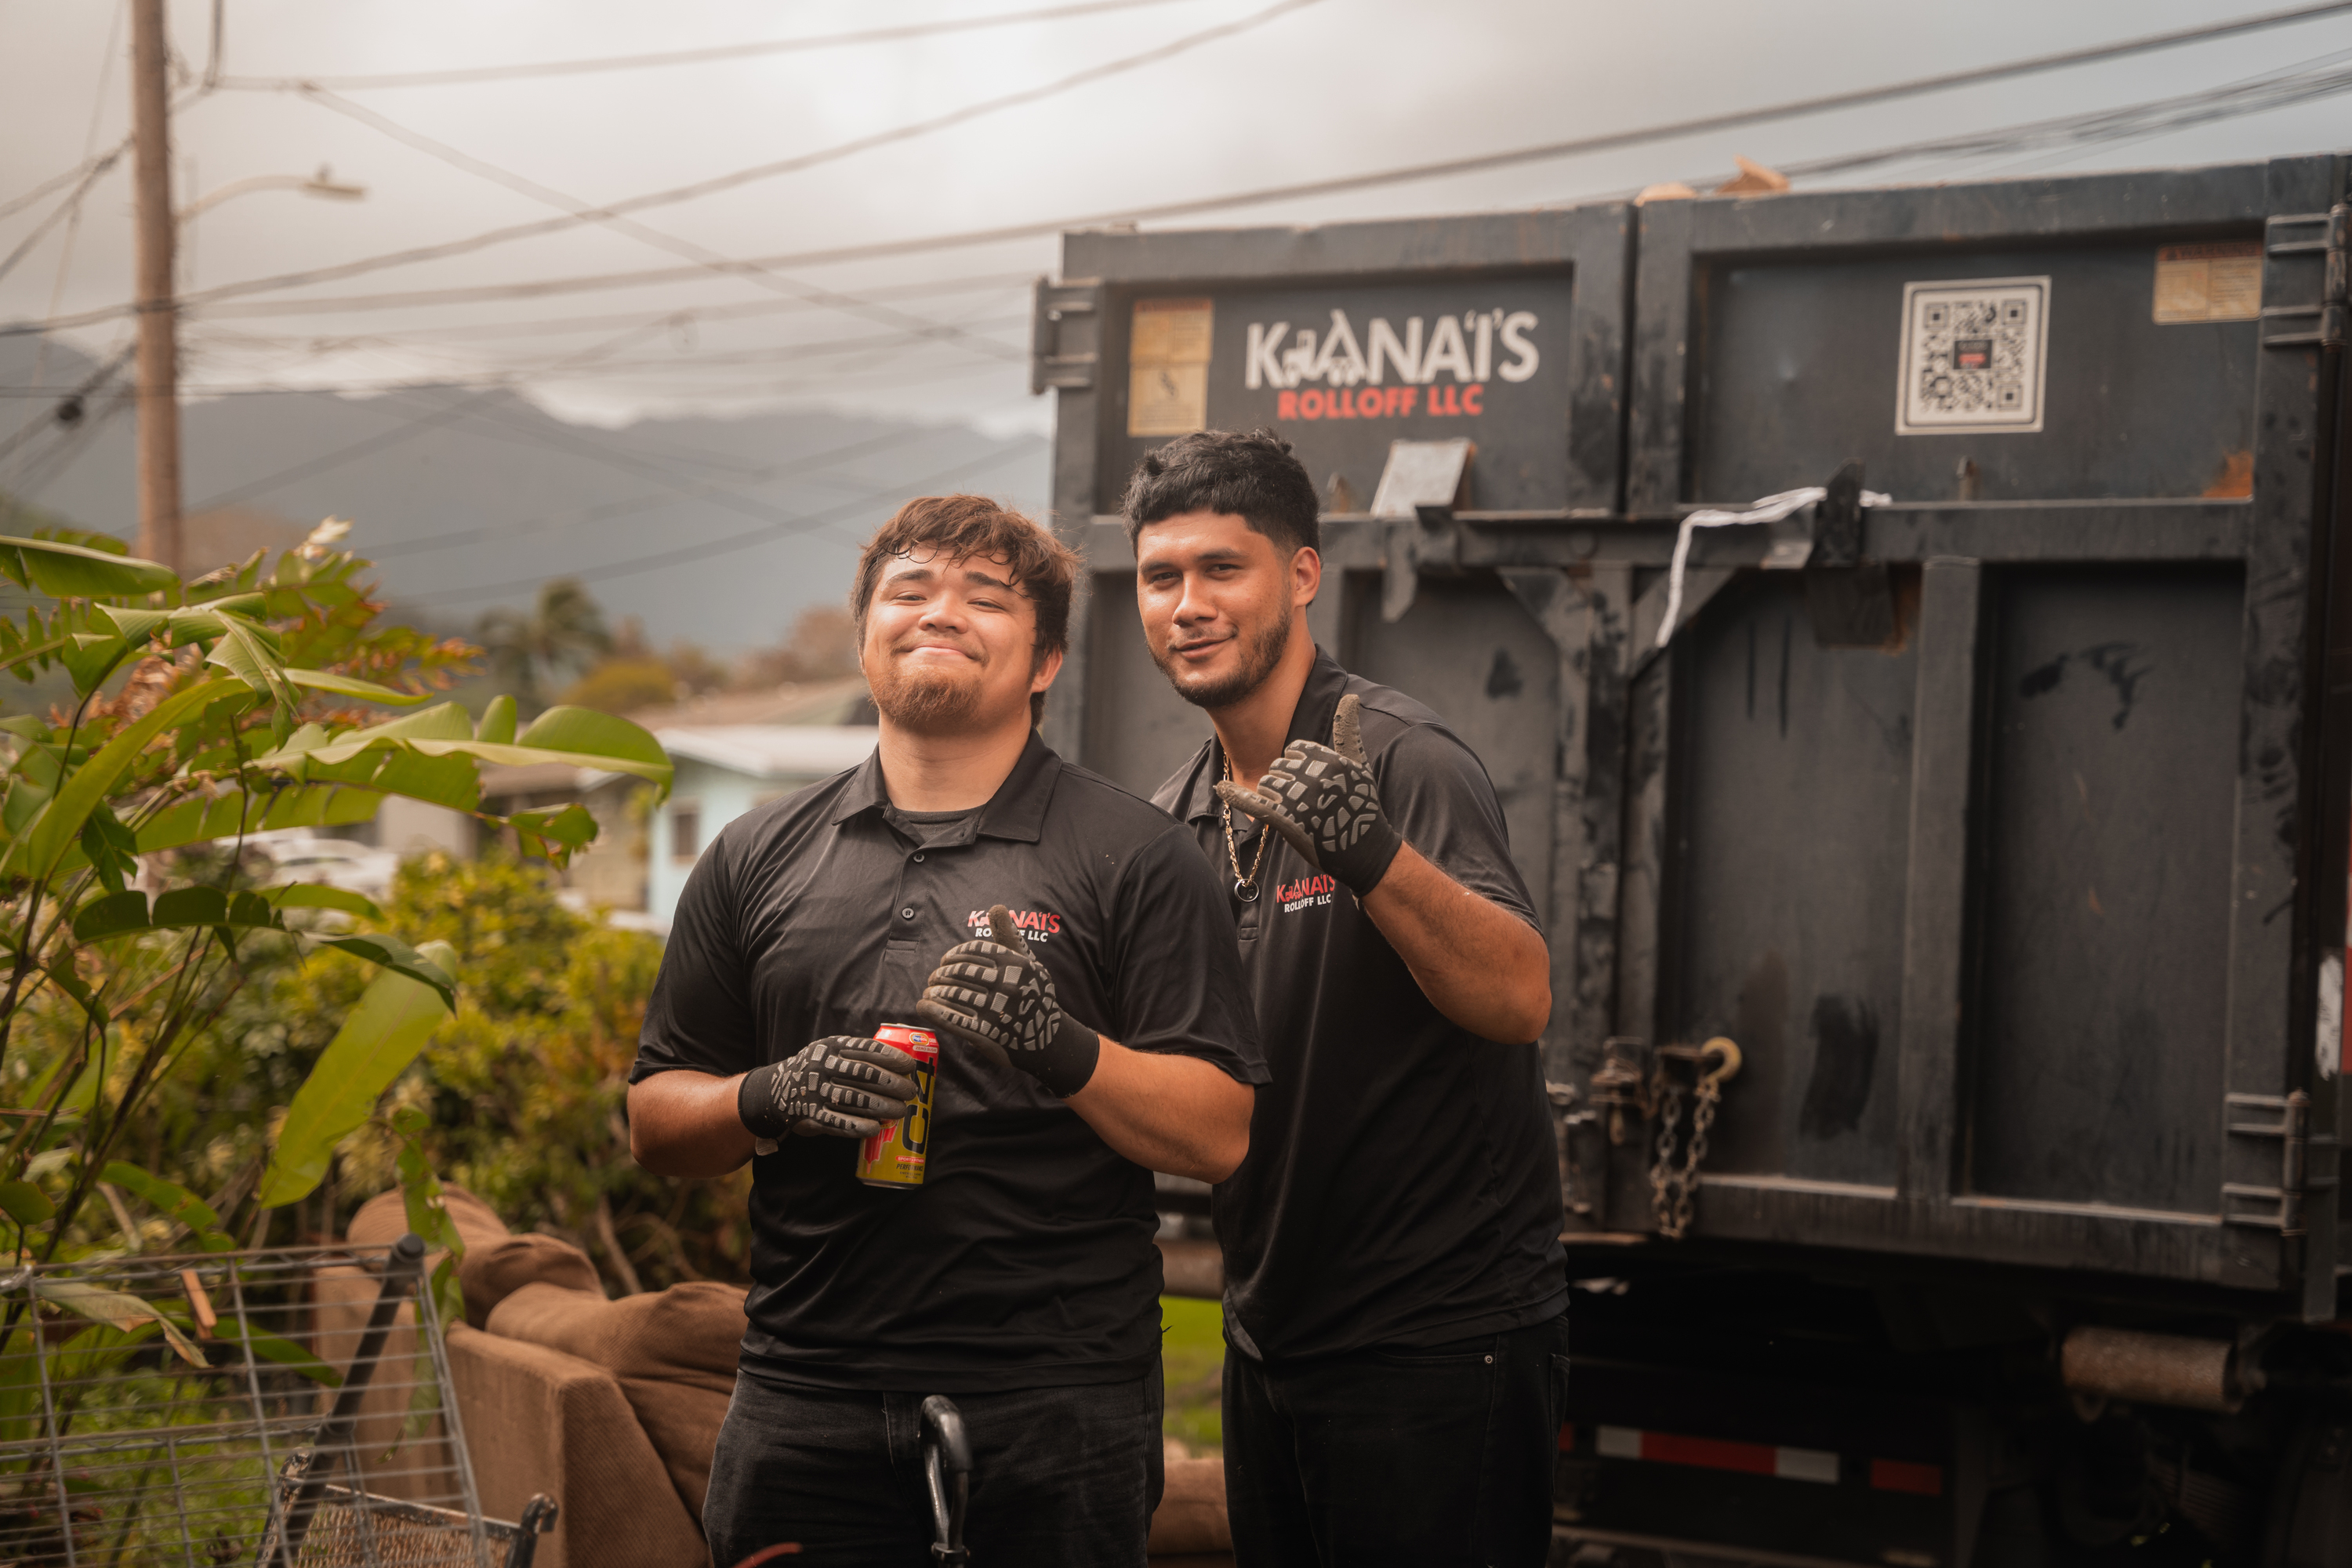 Two Kana'i's Junk Removal techs holding up shaka signs while taking bulky items out of a home in Oahu.